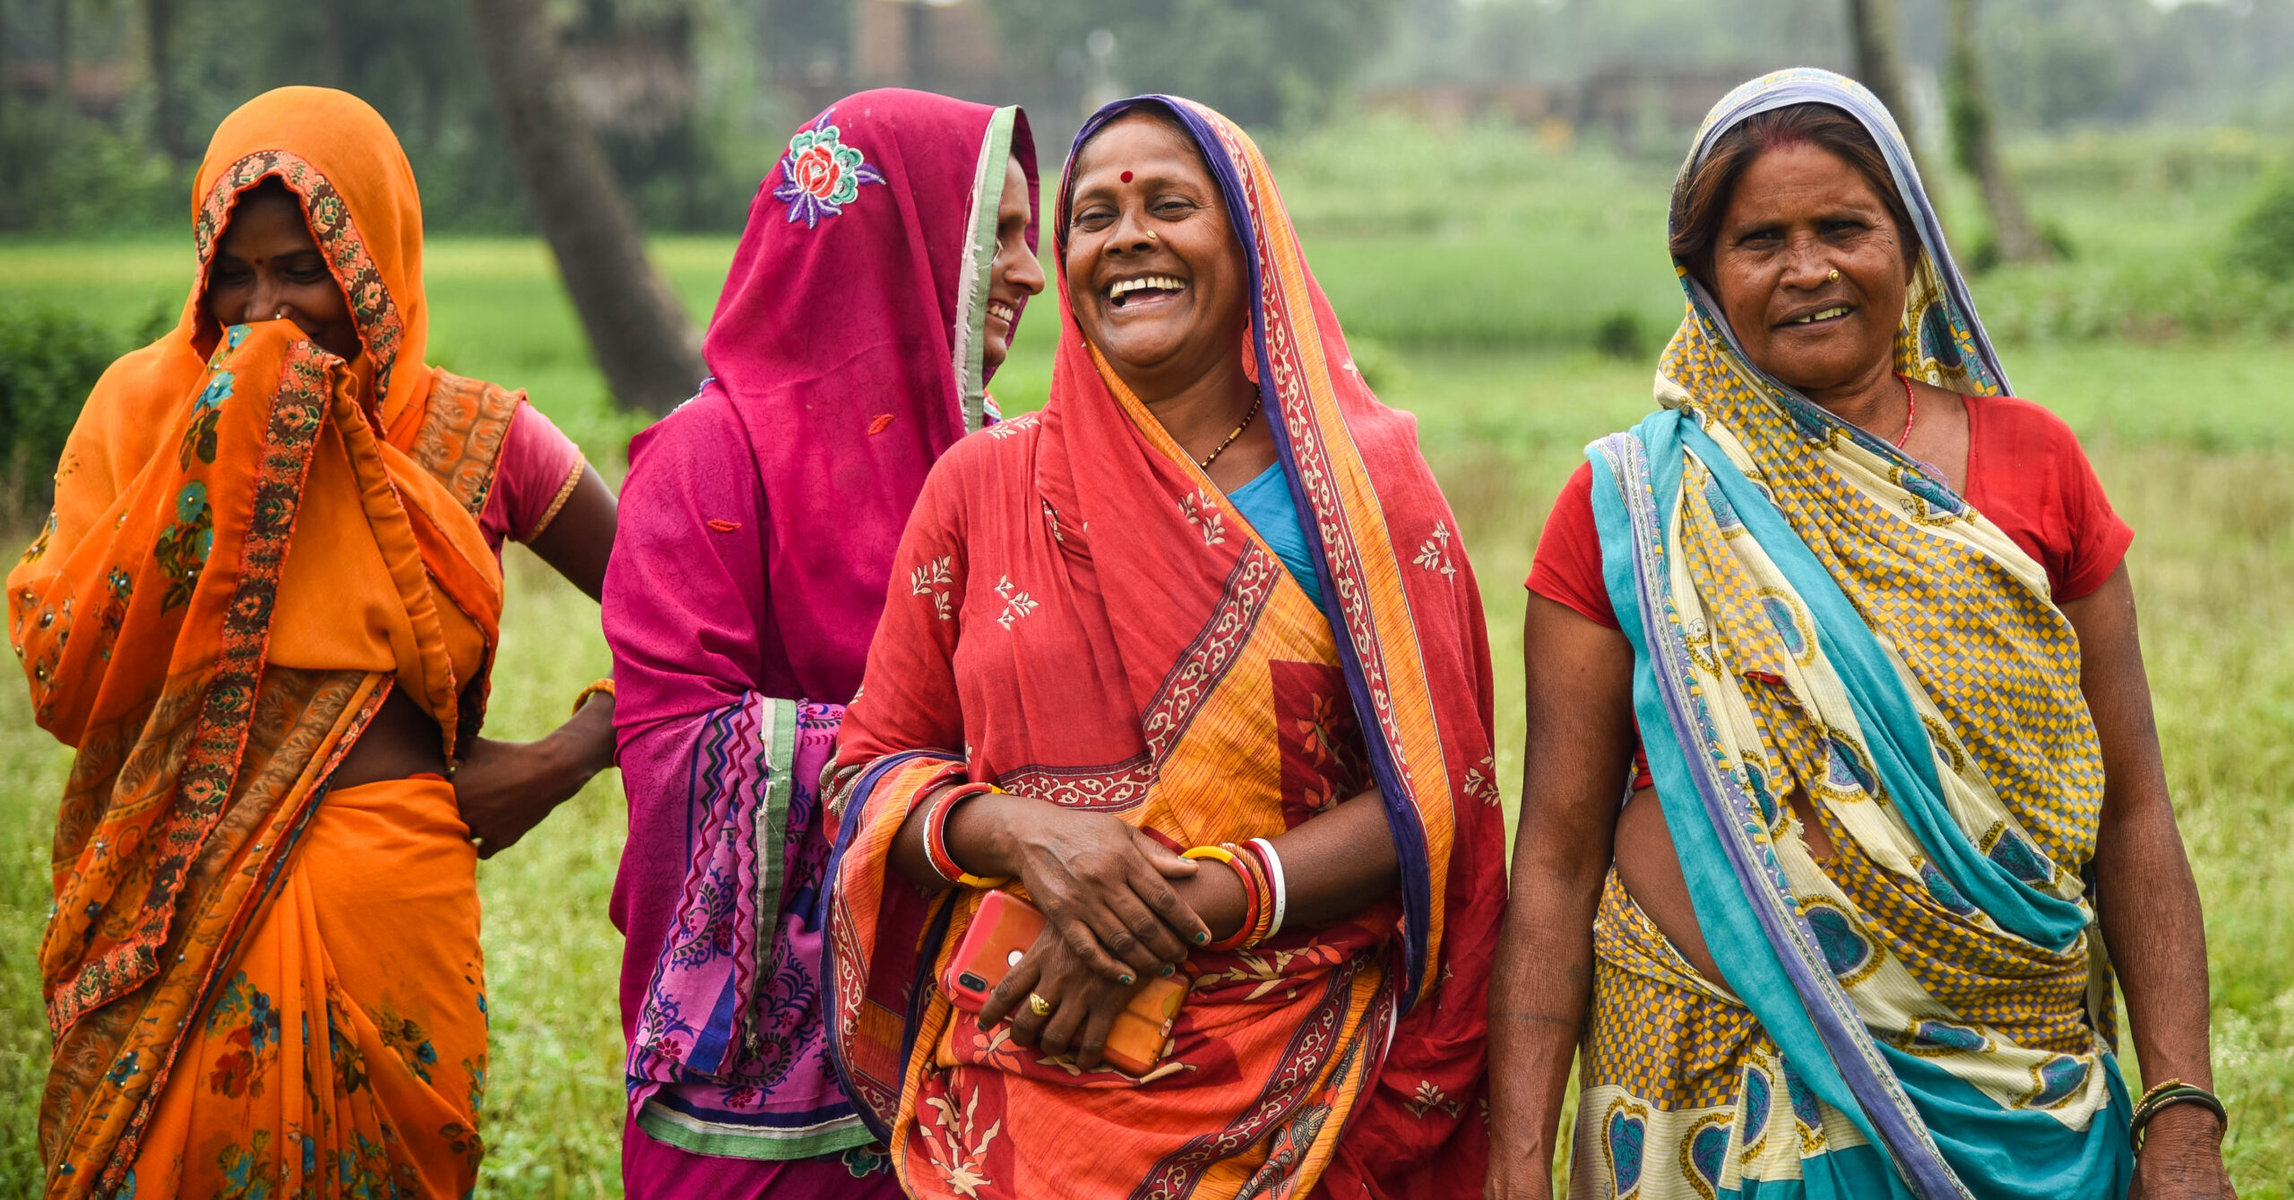 Women in Bihar are smiling in a field and wearing bright-colored clothing.